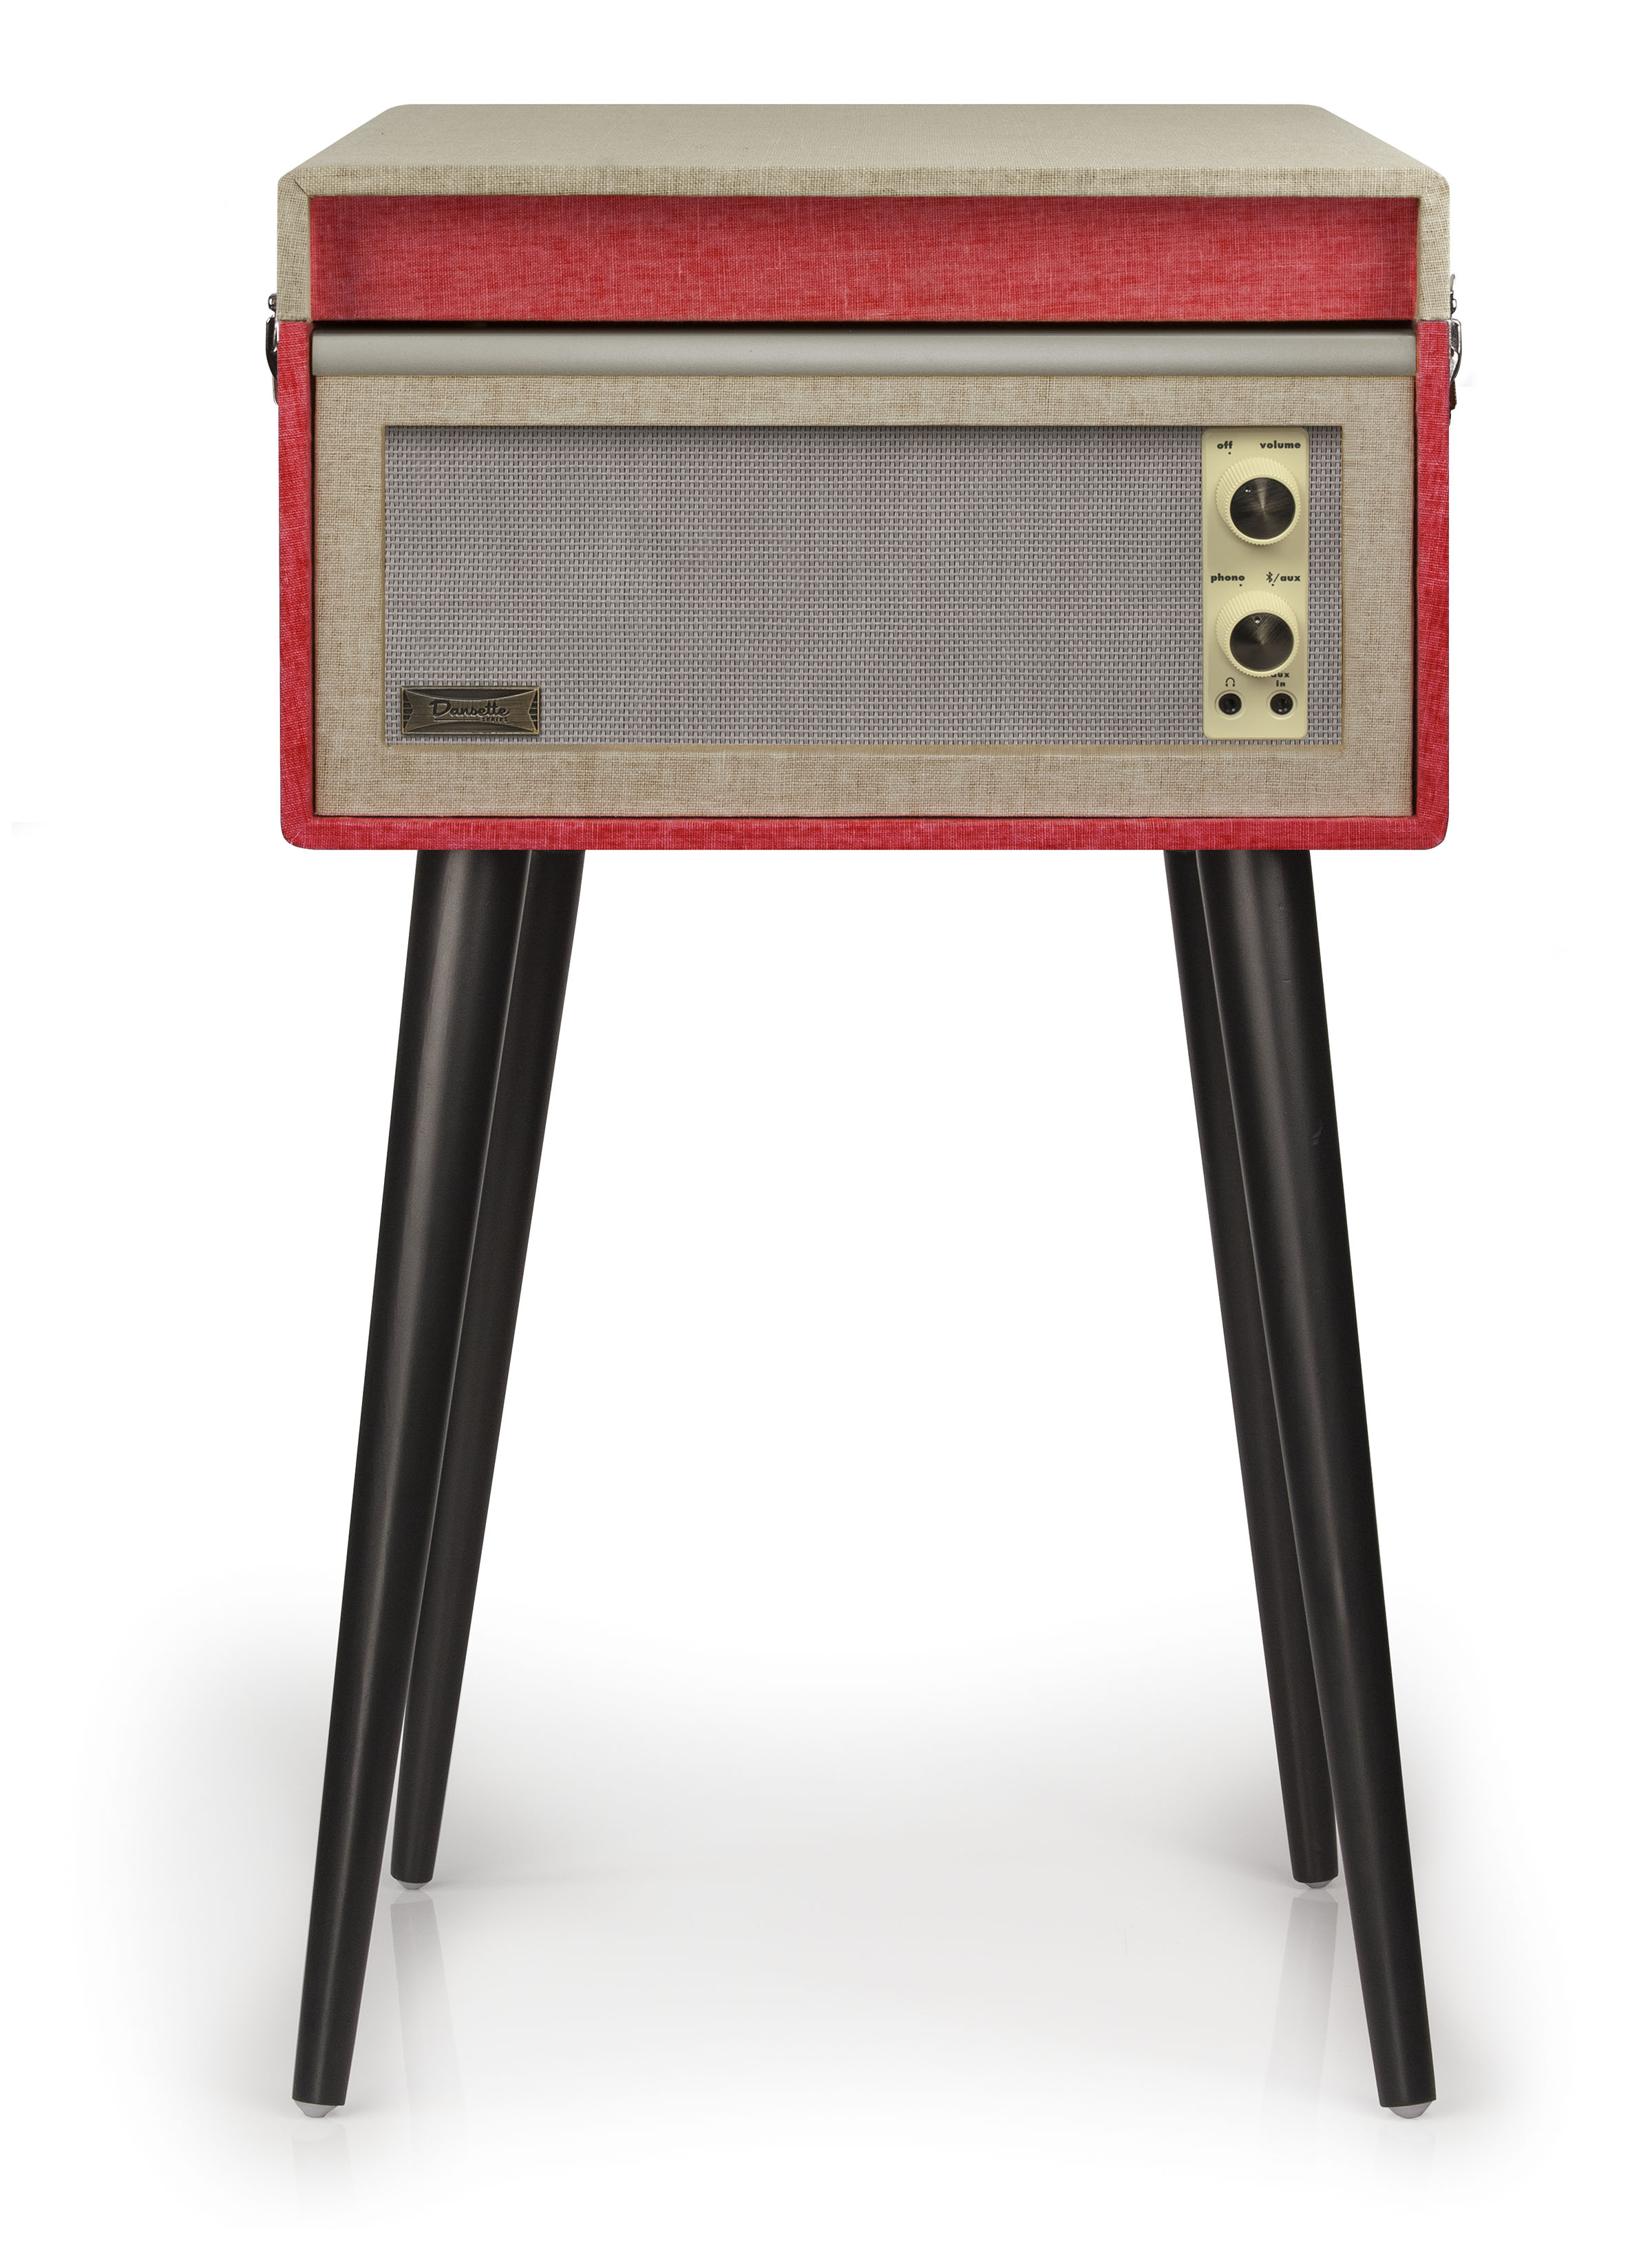 Crosley Dansette Bermuda Bluetooth Portable Suitcase Record Player with 2-speed Turntable - Red - CR6233D-RE - image 4 of 7